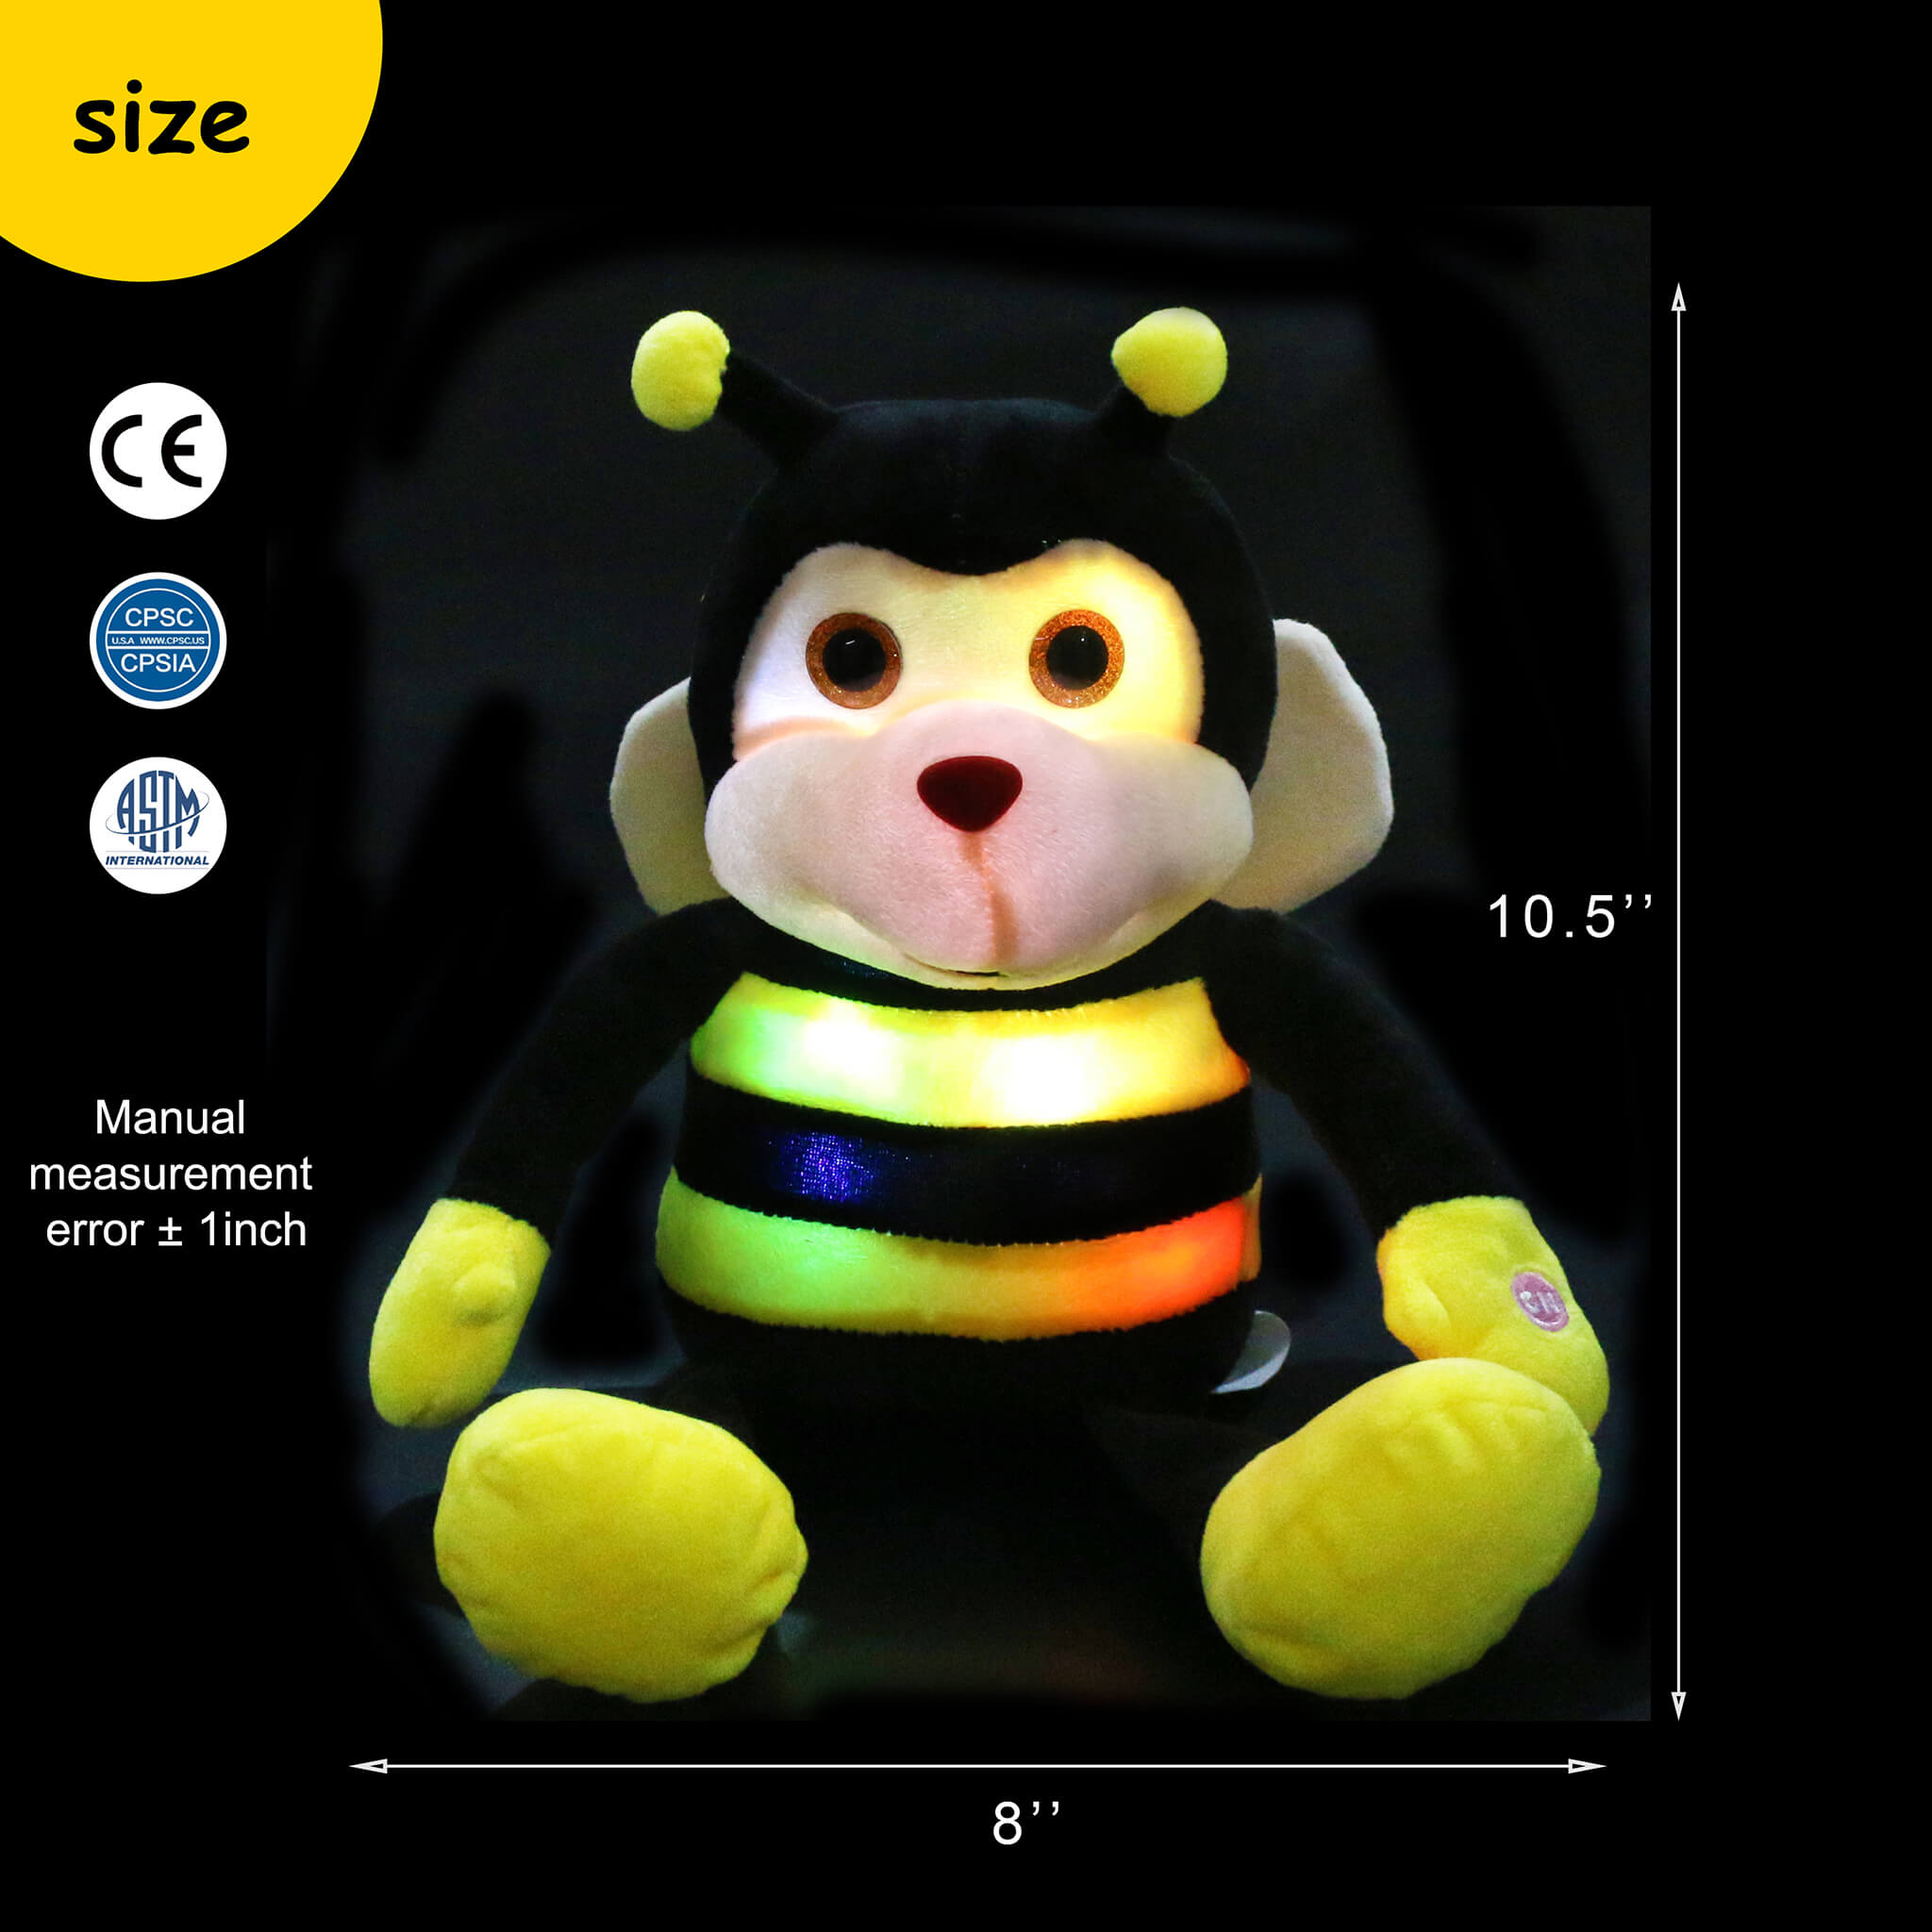 light up stuffed bumble bee plush toy, 10.5'' | Bstaofy - Glow Guards